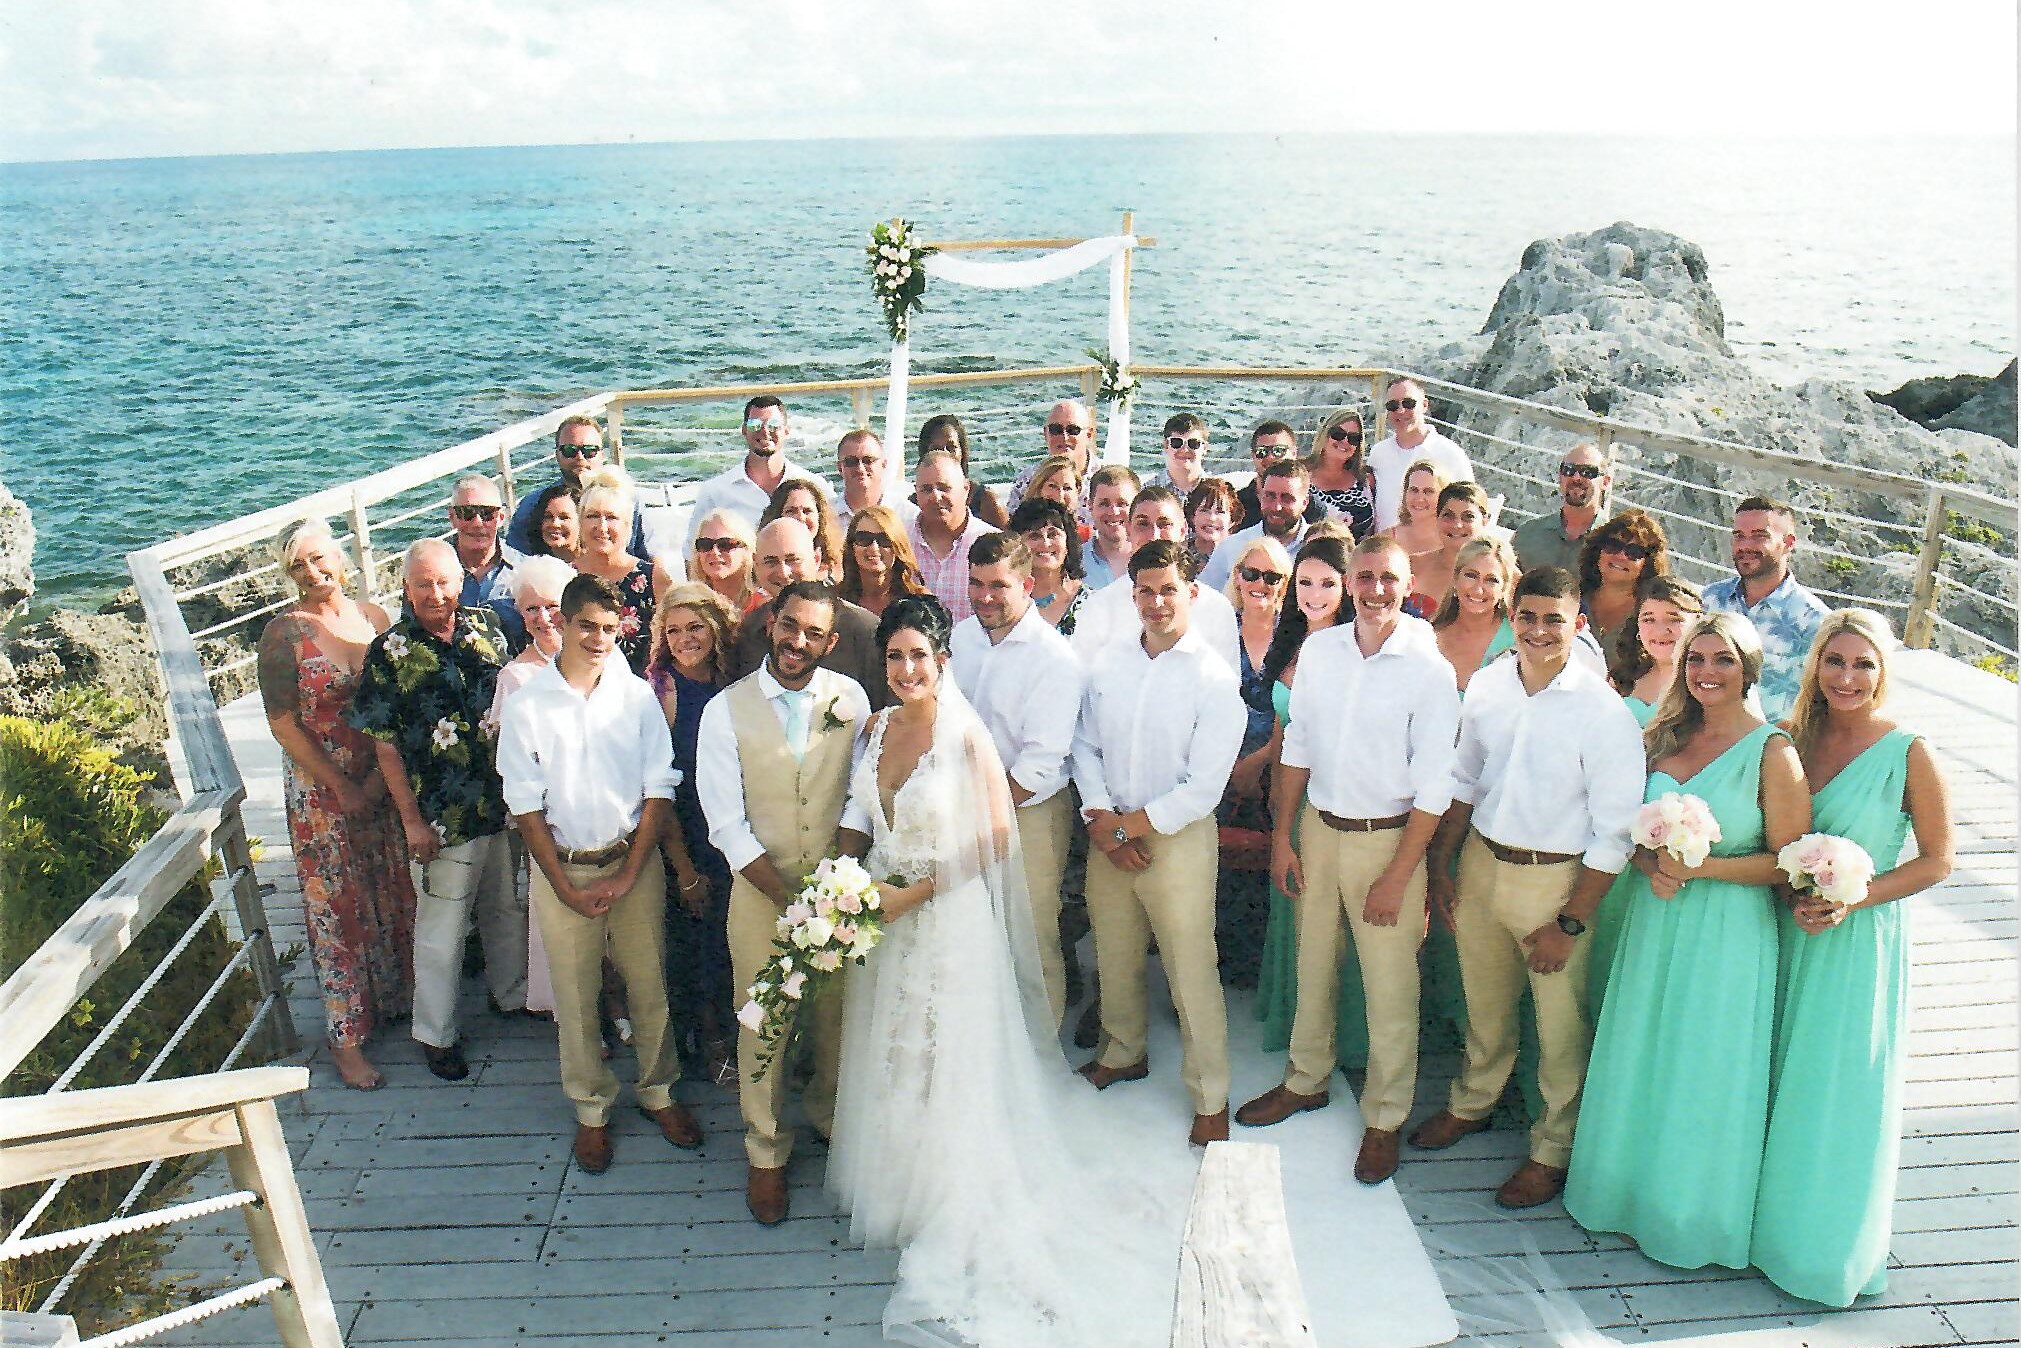 Angela and Anthony's Wedding in Bermuda